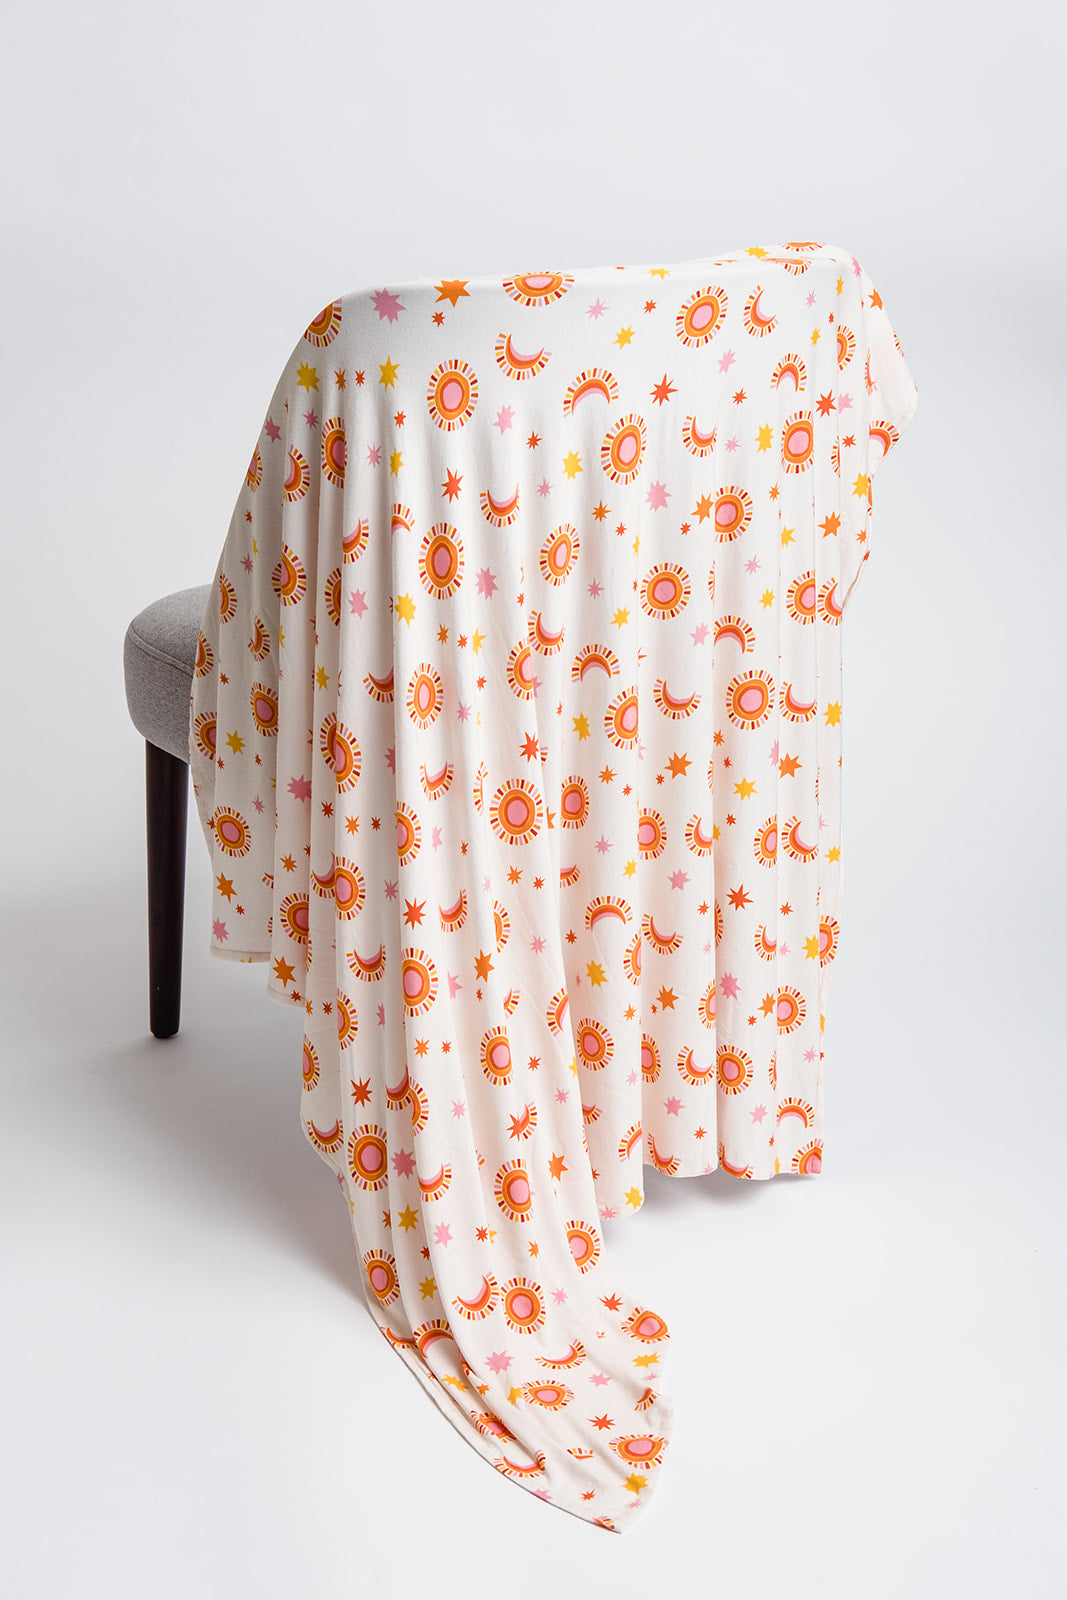 Sun and Moon Swaddle Blanket